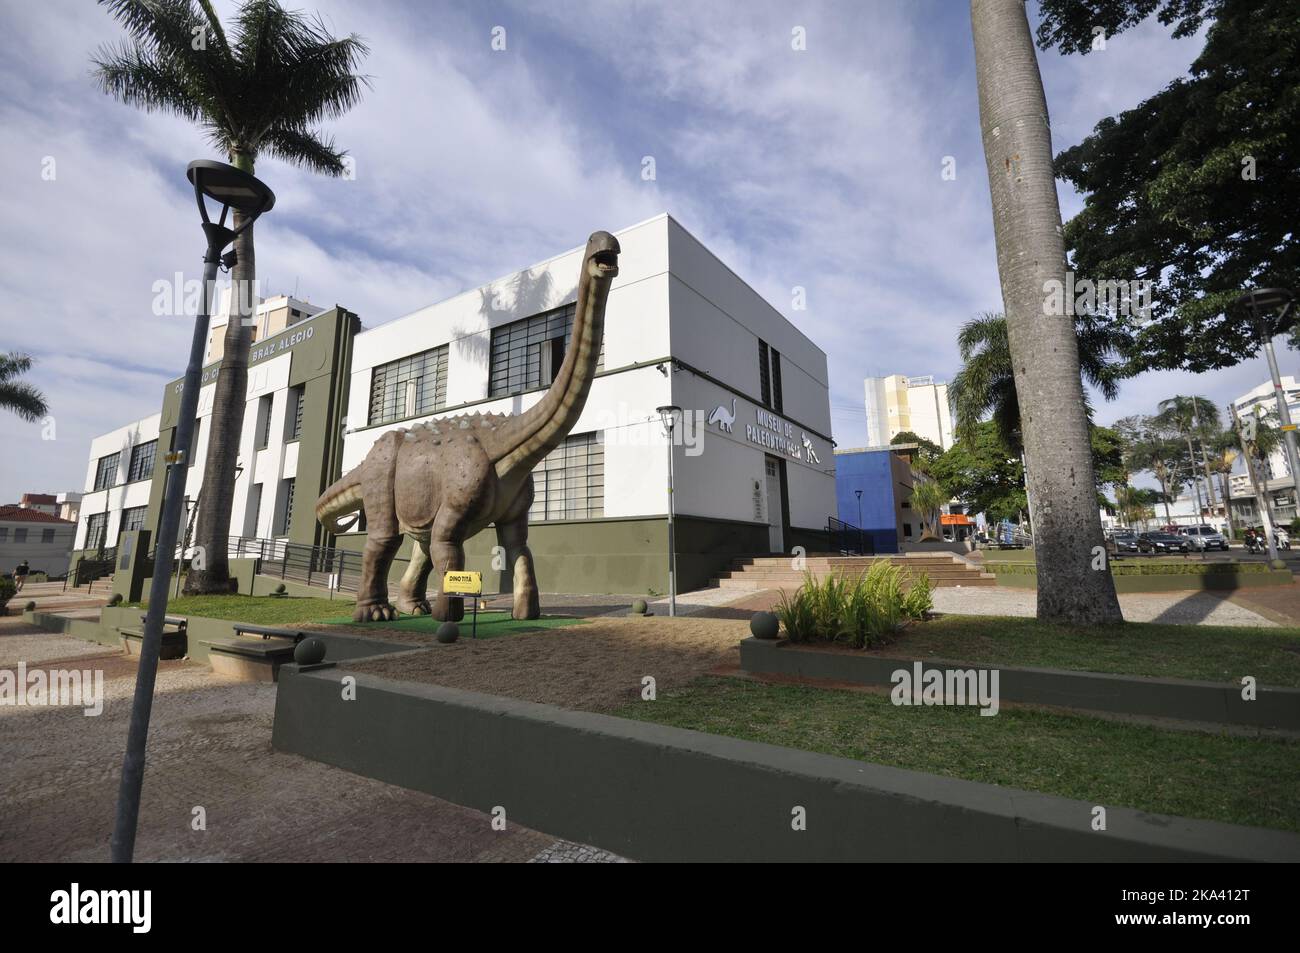 Marilia, São Paulo, Brazil - 27 October 2022: Dinosaur replica in front of the Museum of Paleontology in the city of Marília, São Paulo, Brazil with Stock Photo